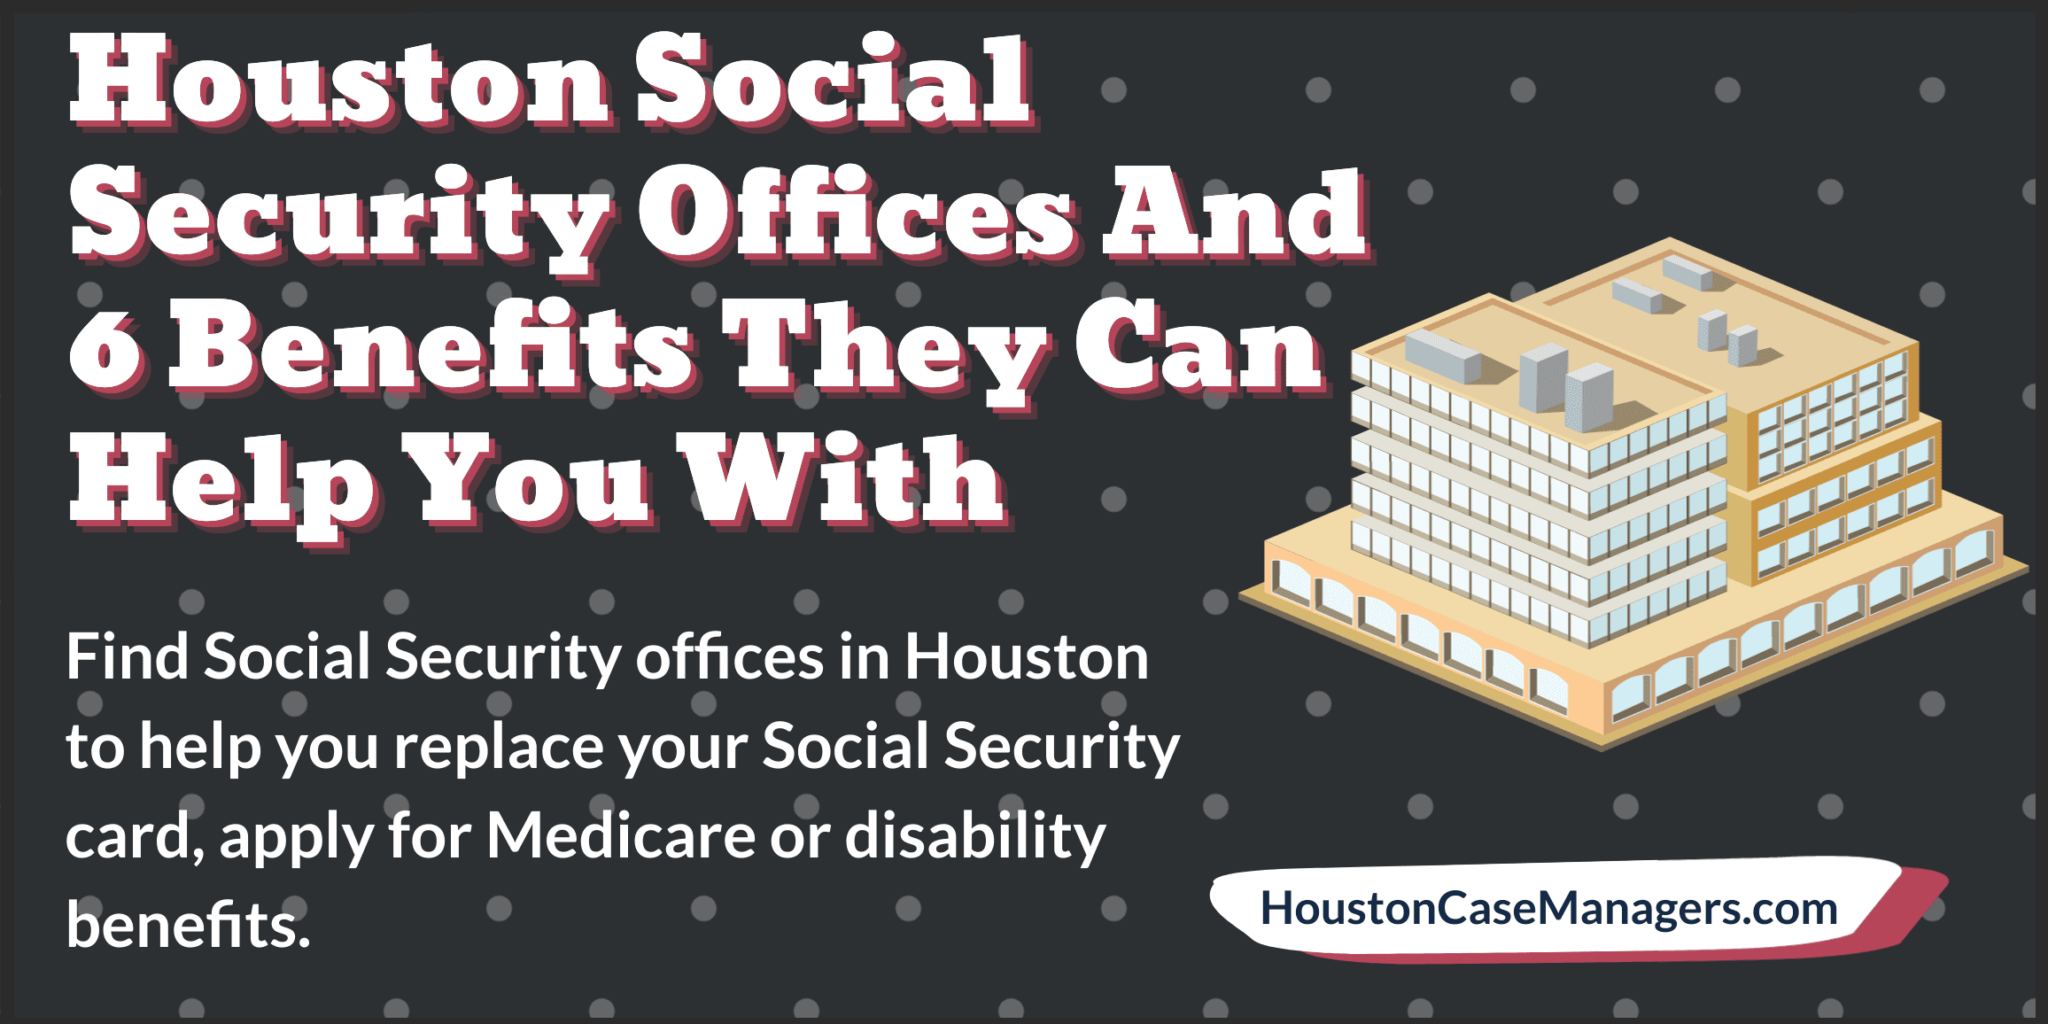 Houston Social Security Offices And 6 Benefits They Can Help You With